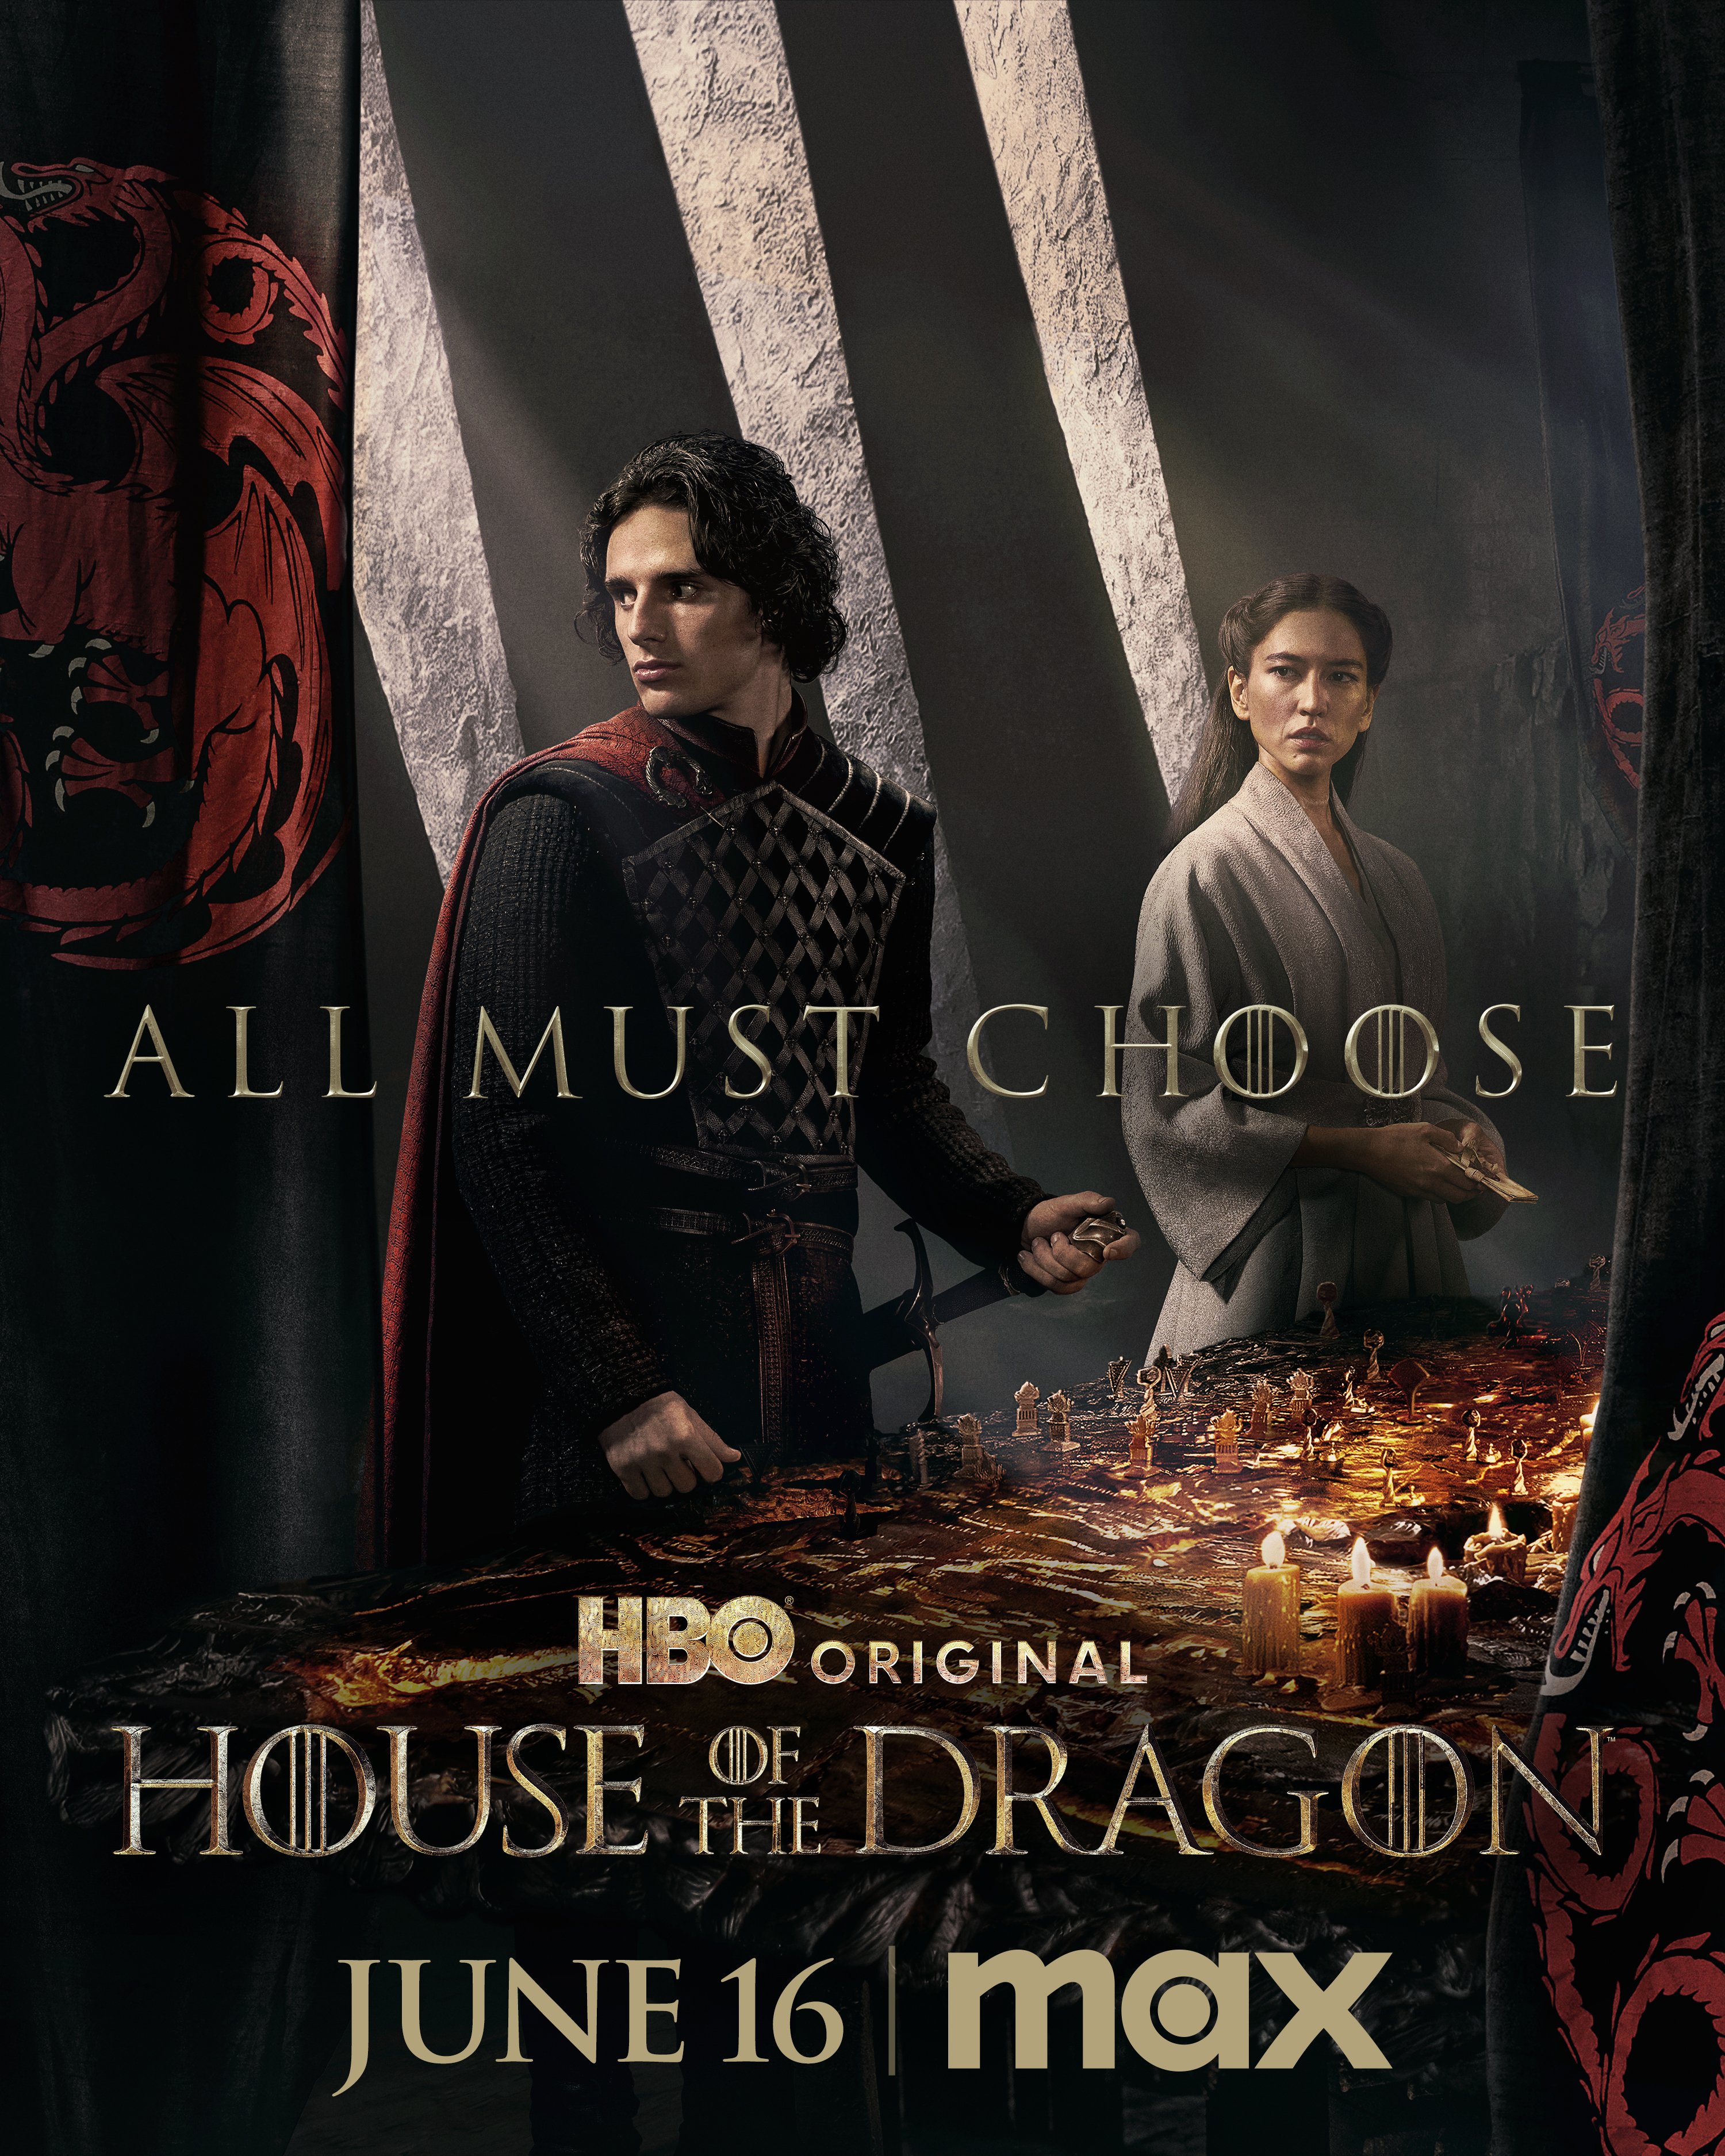 houseofthedragon_posters_s2_01.jpg